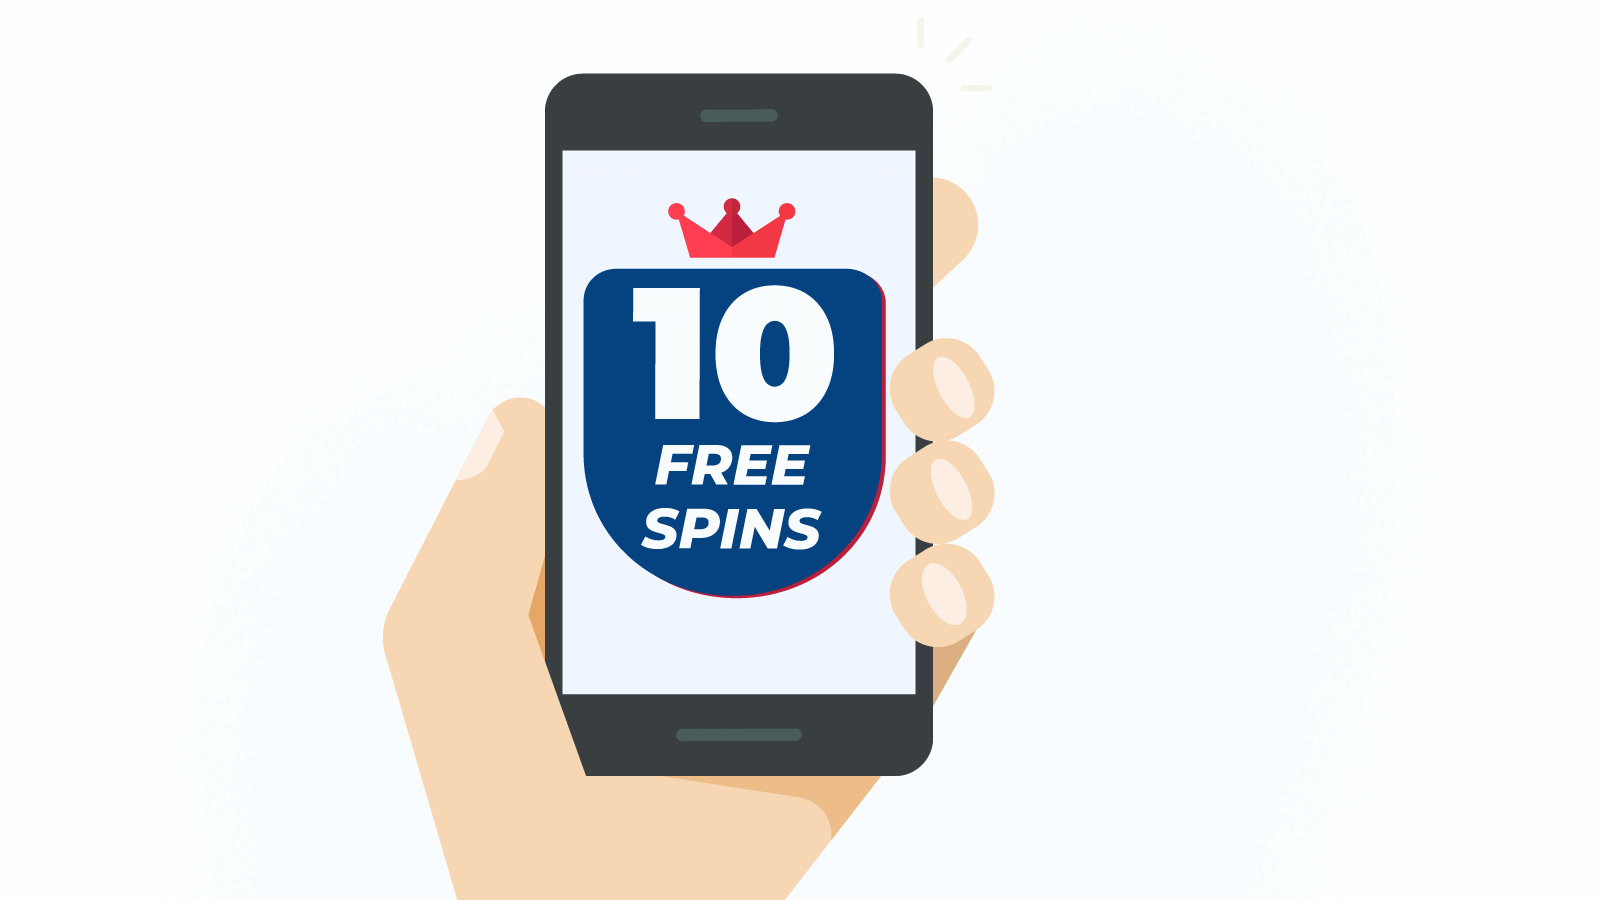 Why Go Mobile With 10 Free Spins on Registration No Deposit Offers